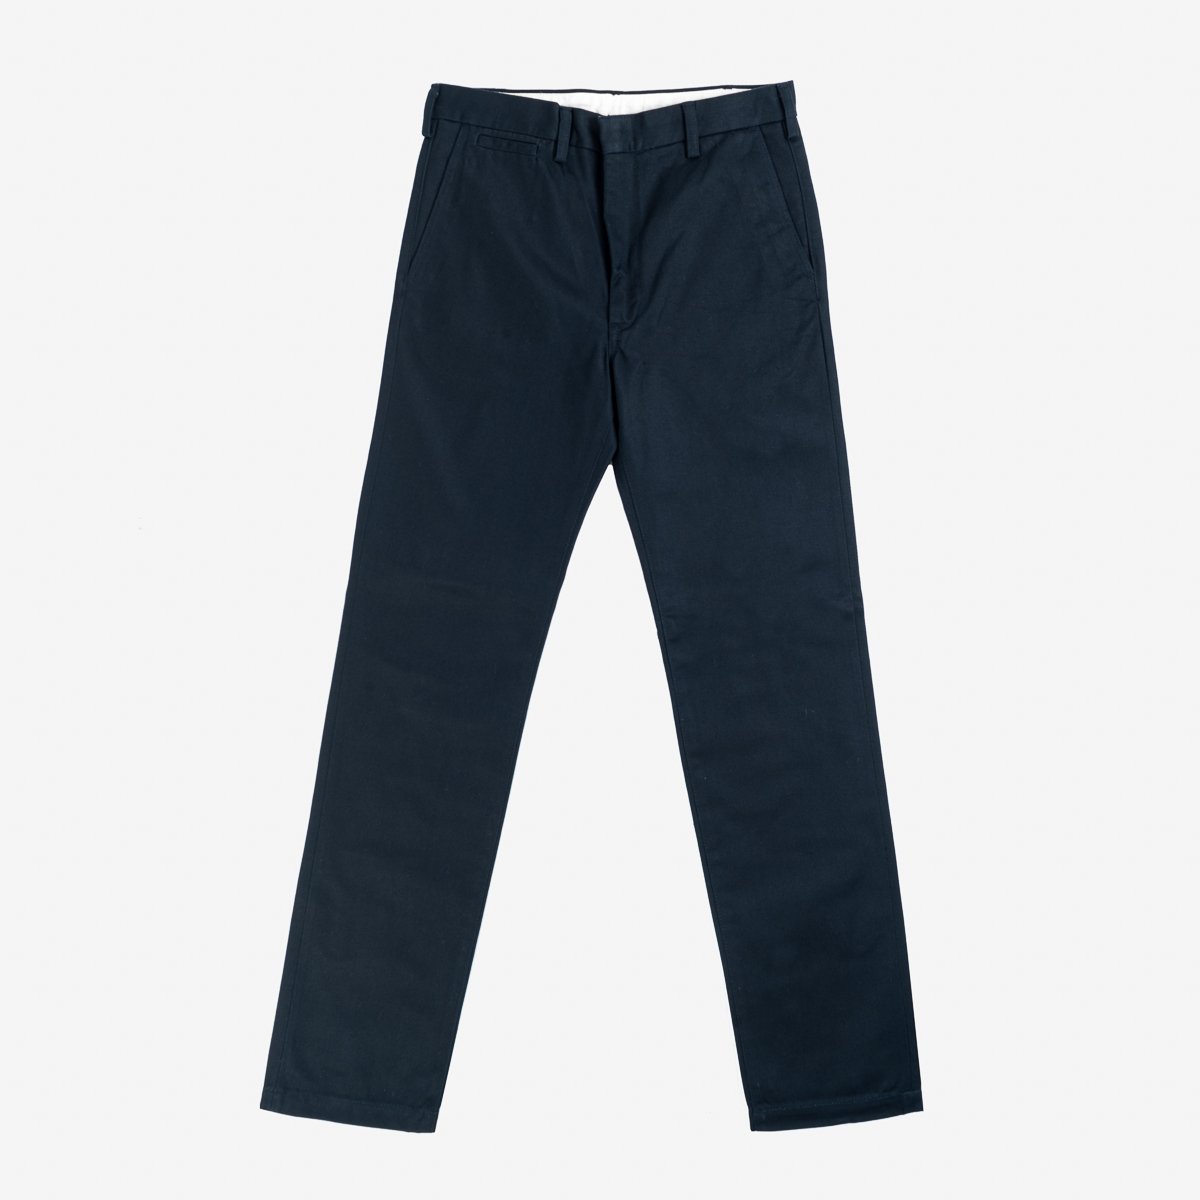 Iron Heart 12oz Heavy Cotton Relaxed Fit Chinos - Navy